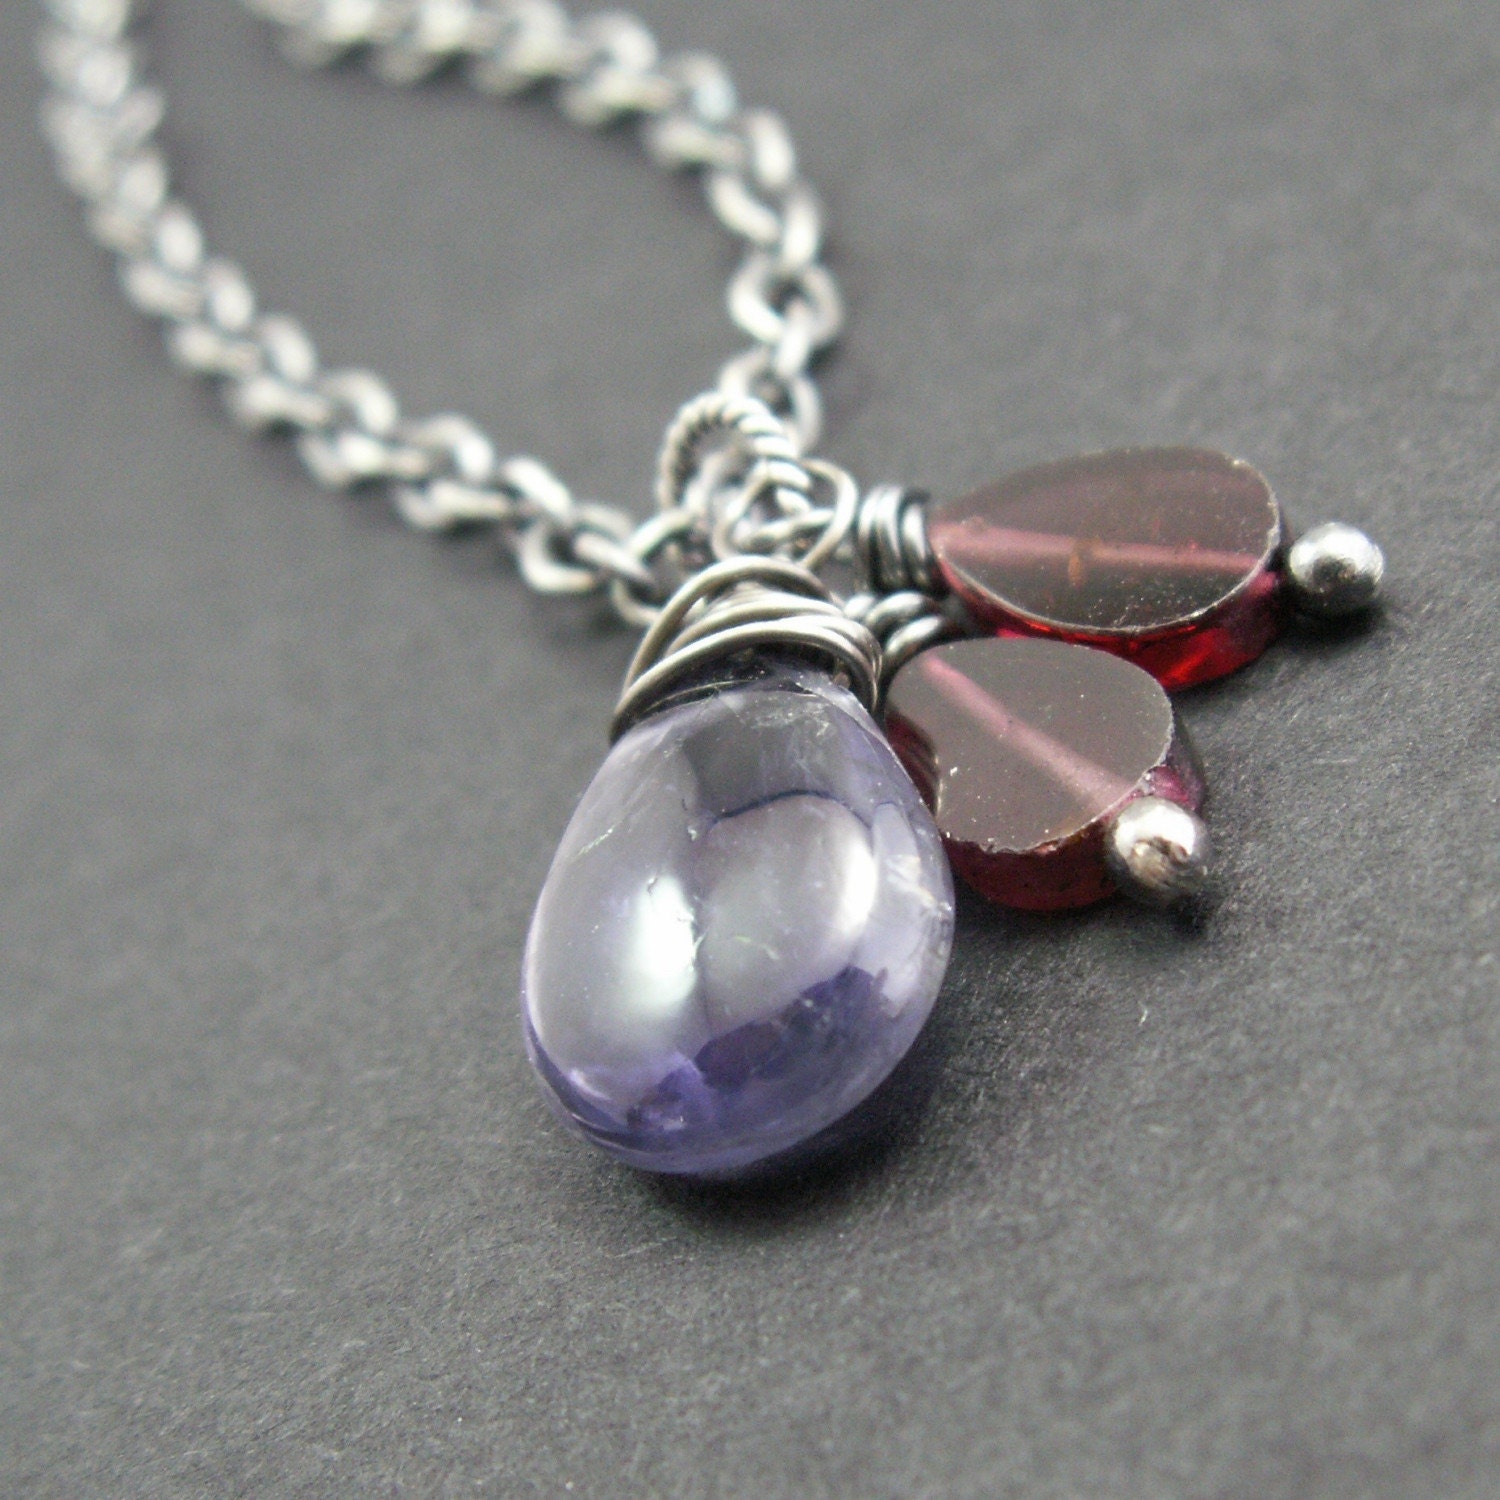 handcrafted jewelry necklace iolite garnets sterling silver oxidized